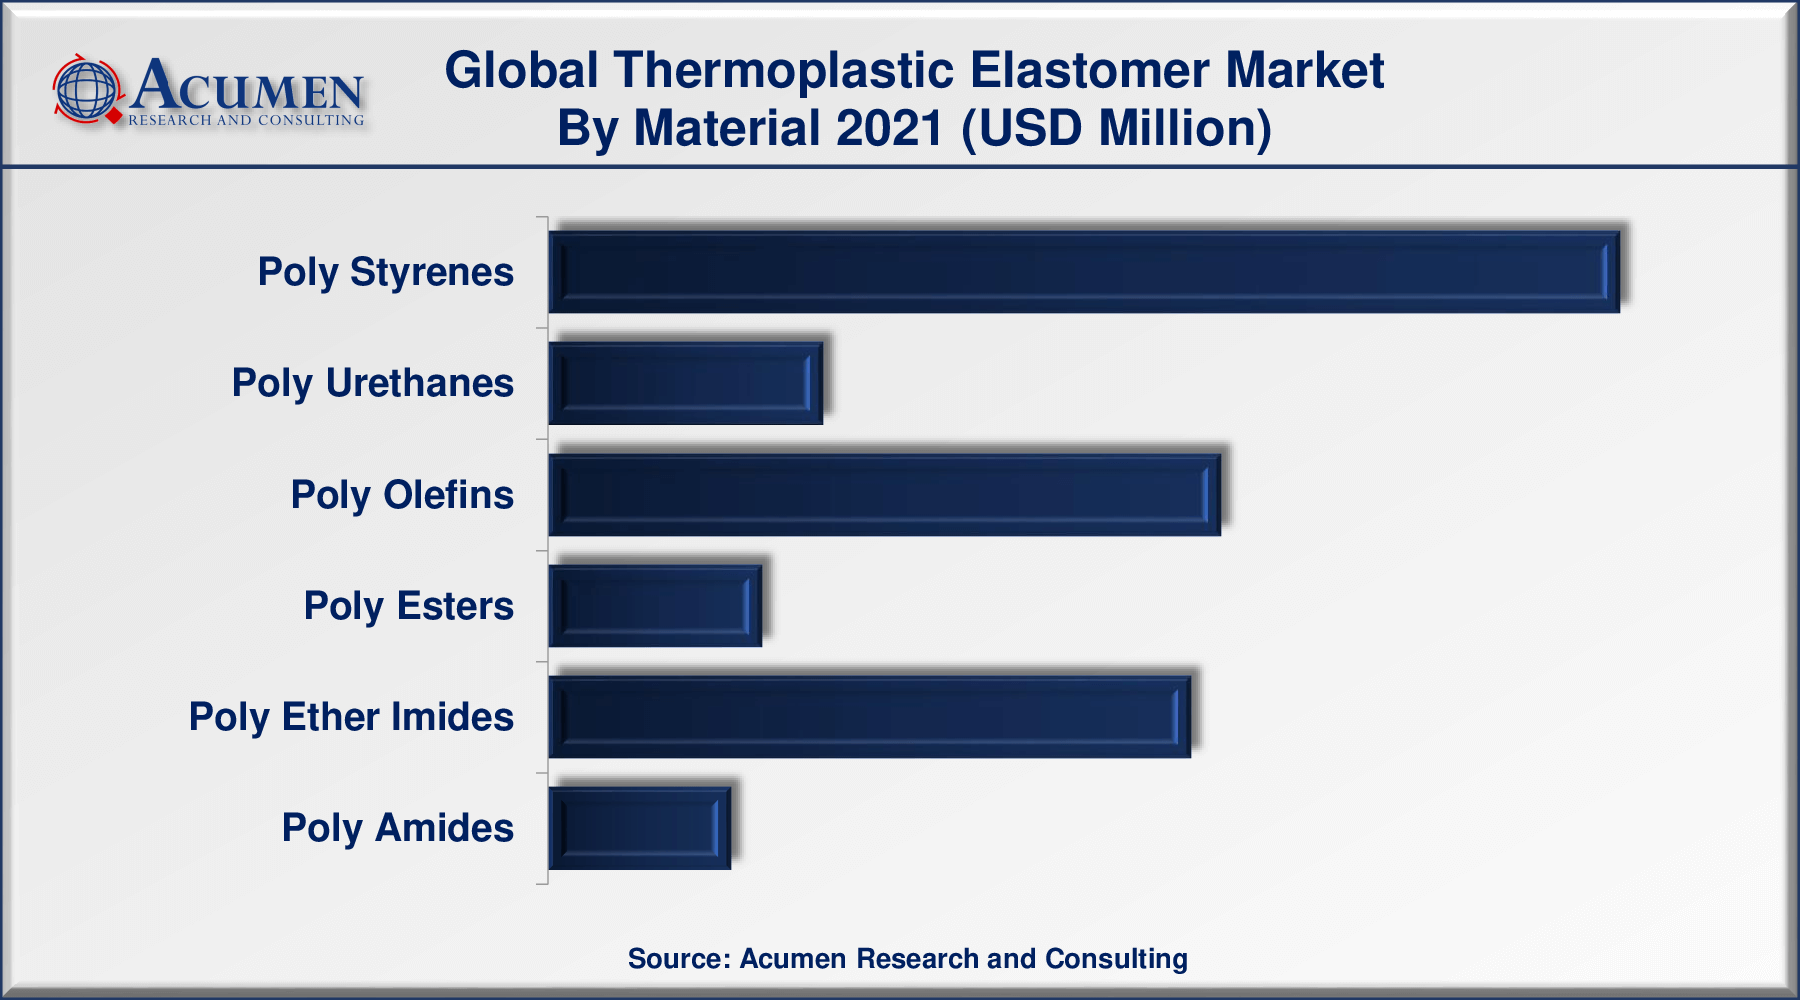 The Global Thermoplastic Elastomer Market Size was valued at USD 21,431 Million in 2021 and is predicted to be worth USD 39,009 Million By 2030, with a CAGR of 7.1% from 2022 to 2030